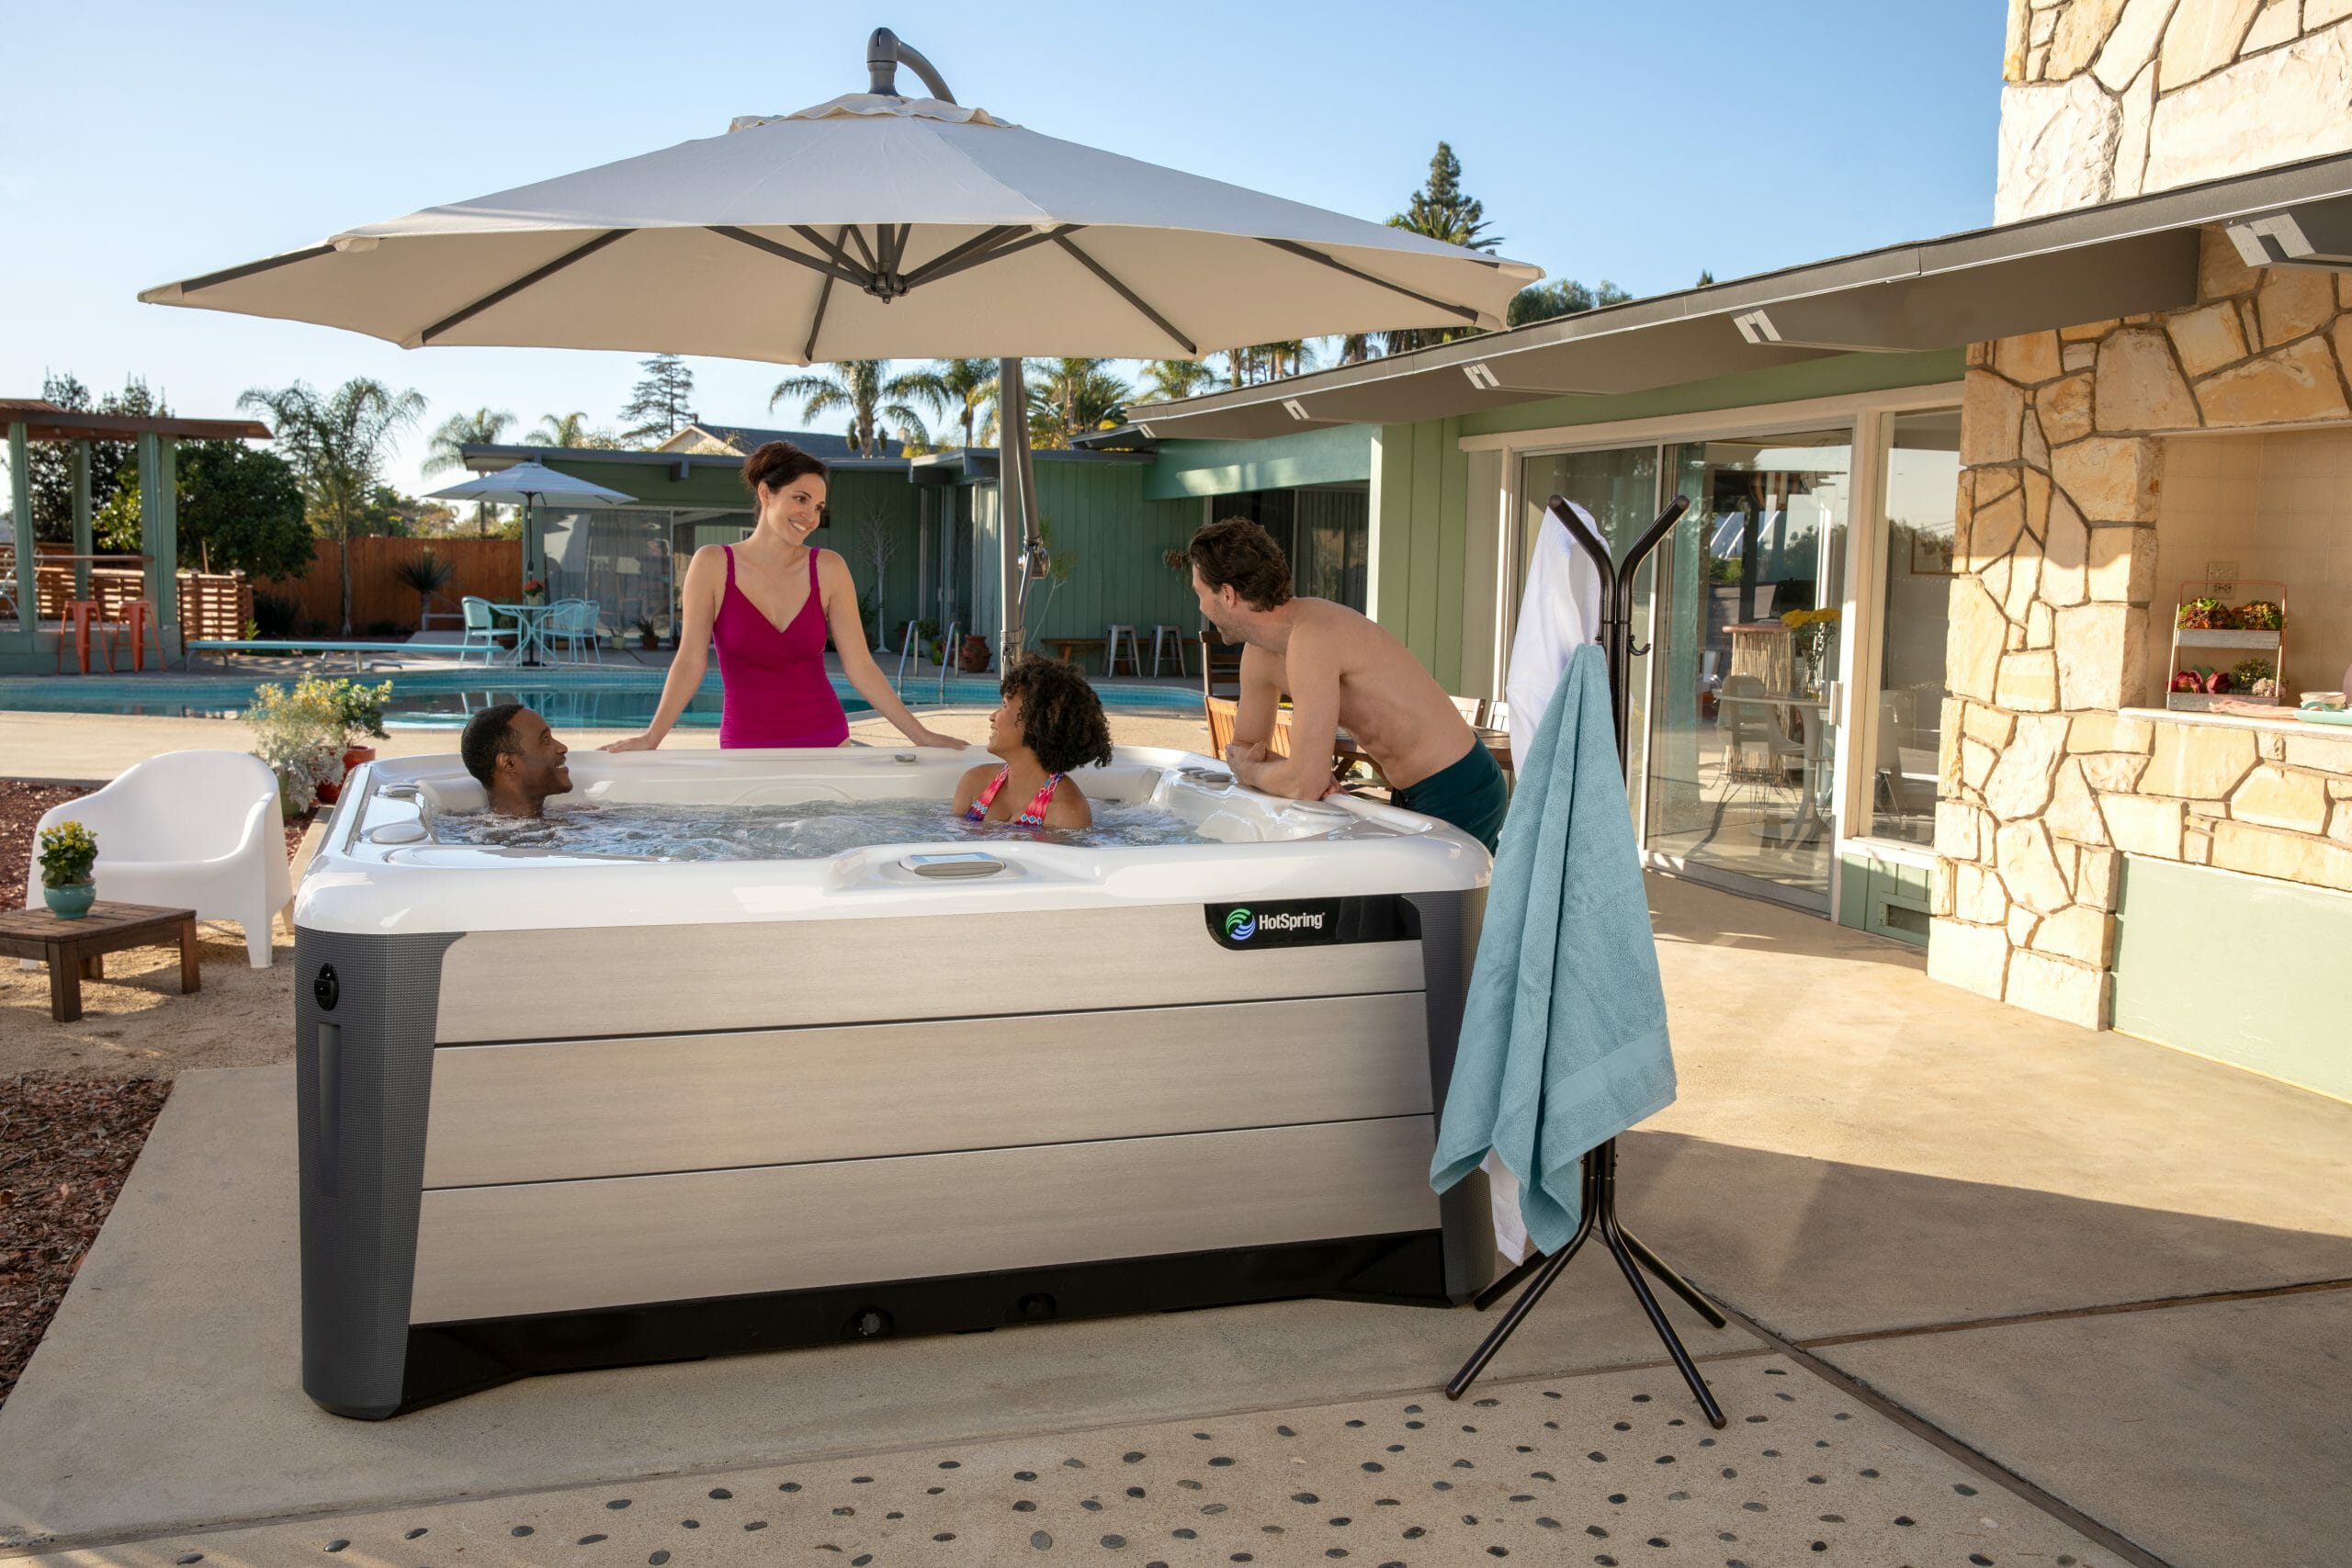 How A Hot Tub Helps You Do More Of What You Love